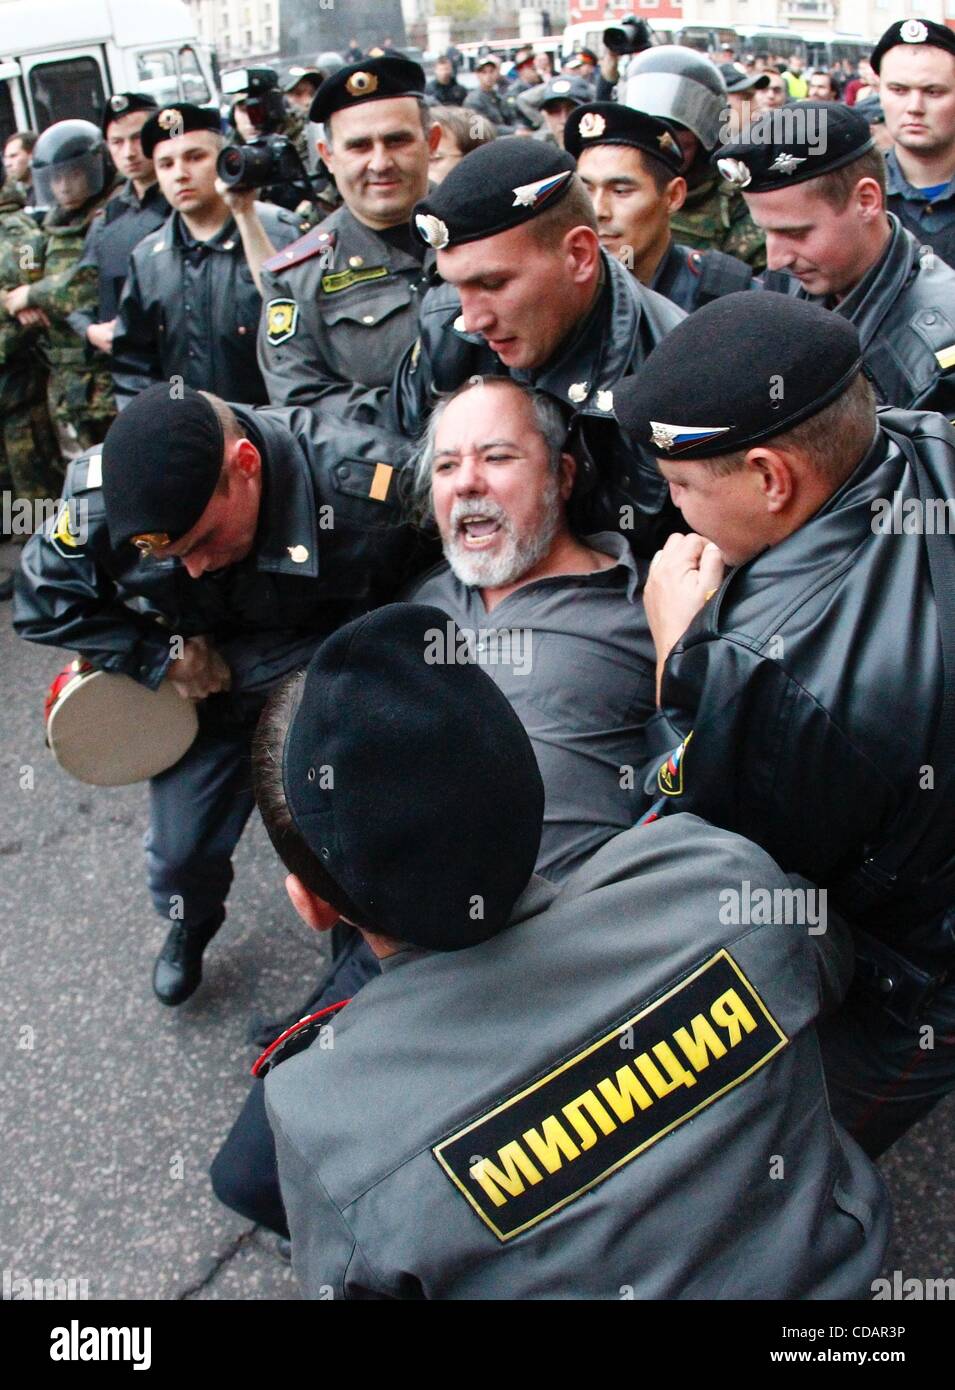 Sept 12, 2010 - Moscow, Russia - Thousands of Russians have rallied in what they are calling 'Day of Anger' protest against the government of Russian Prime Minister Putin, as part of opposition protests planned across the country. Police arresting protesters in front of the Moscow Mayor's head offic Stock Photo